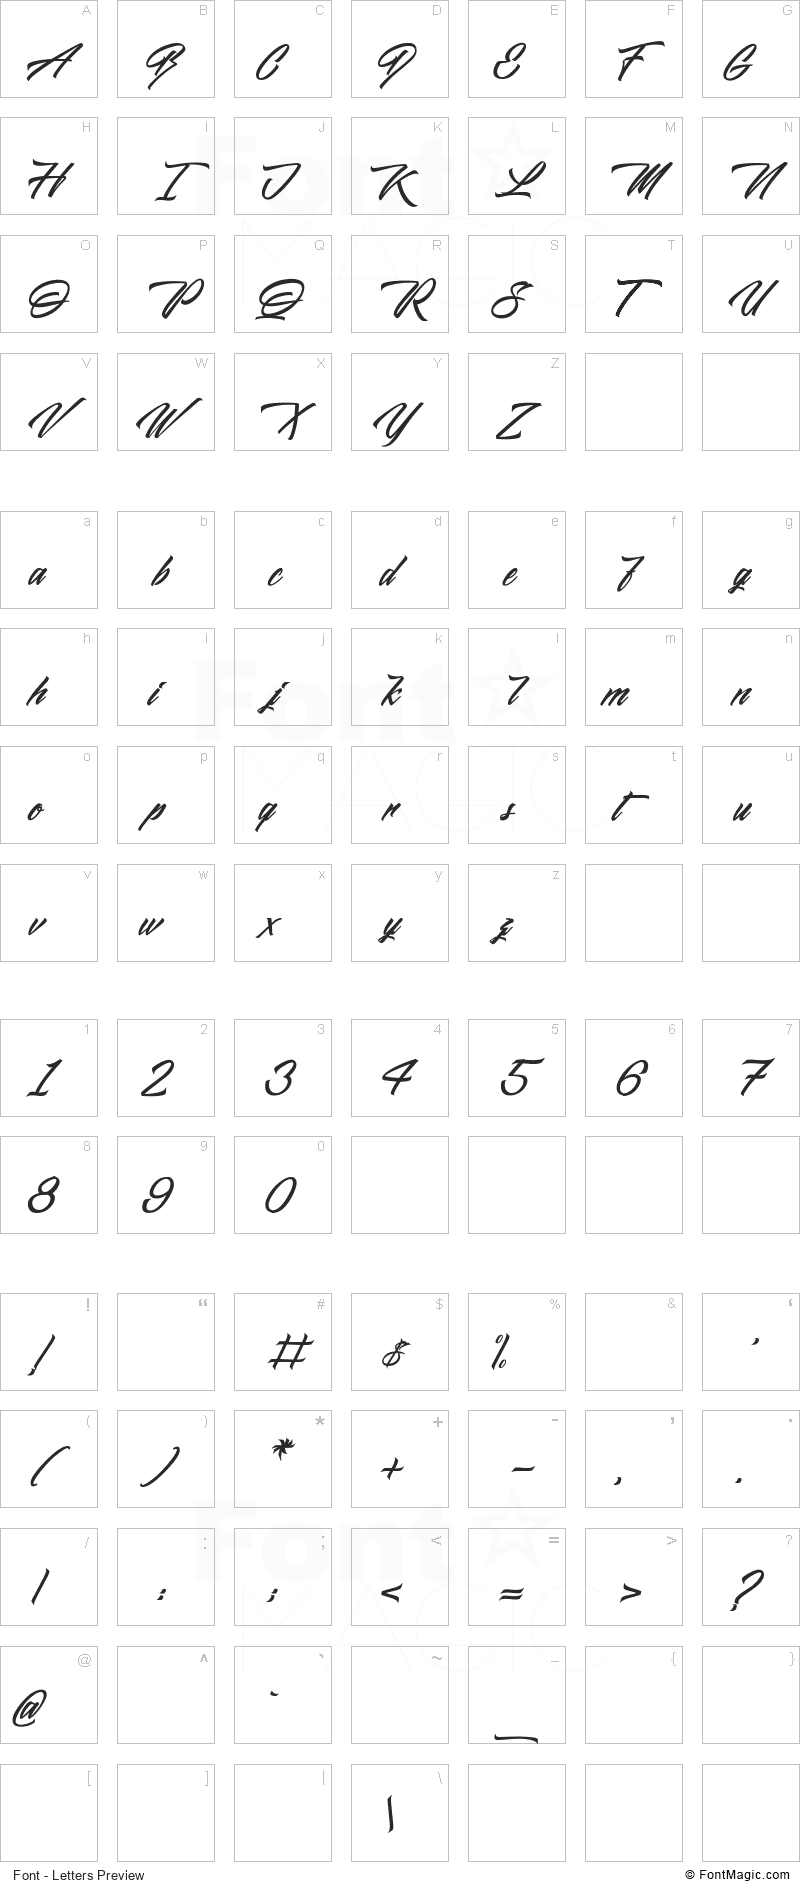 Midnight Street Font - All Latters Preview Chart